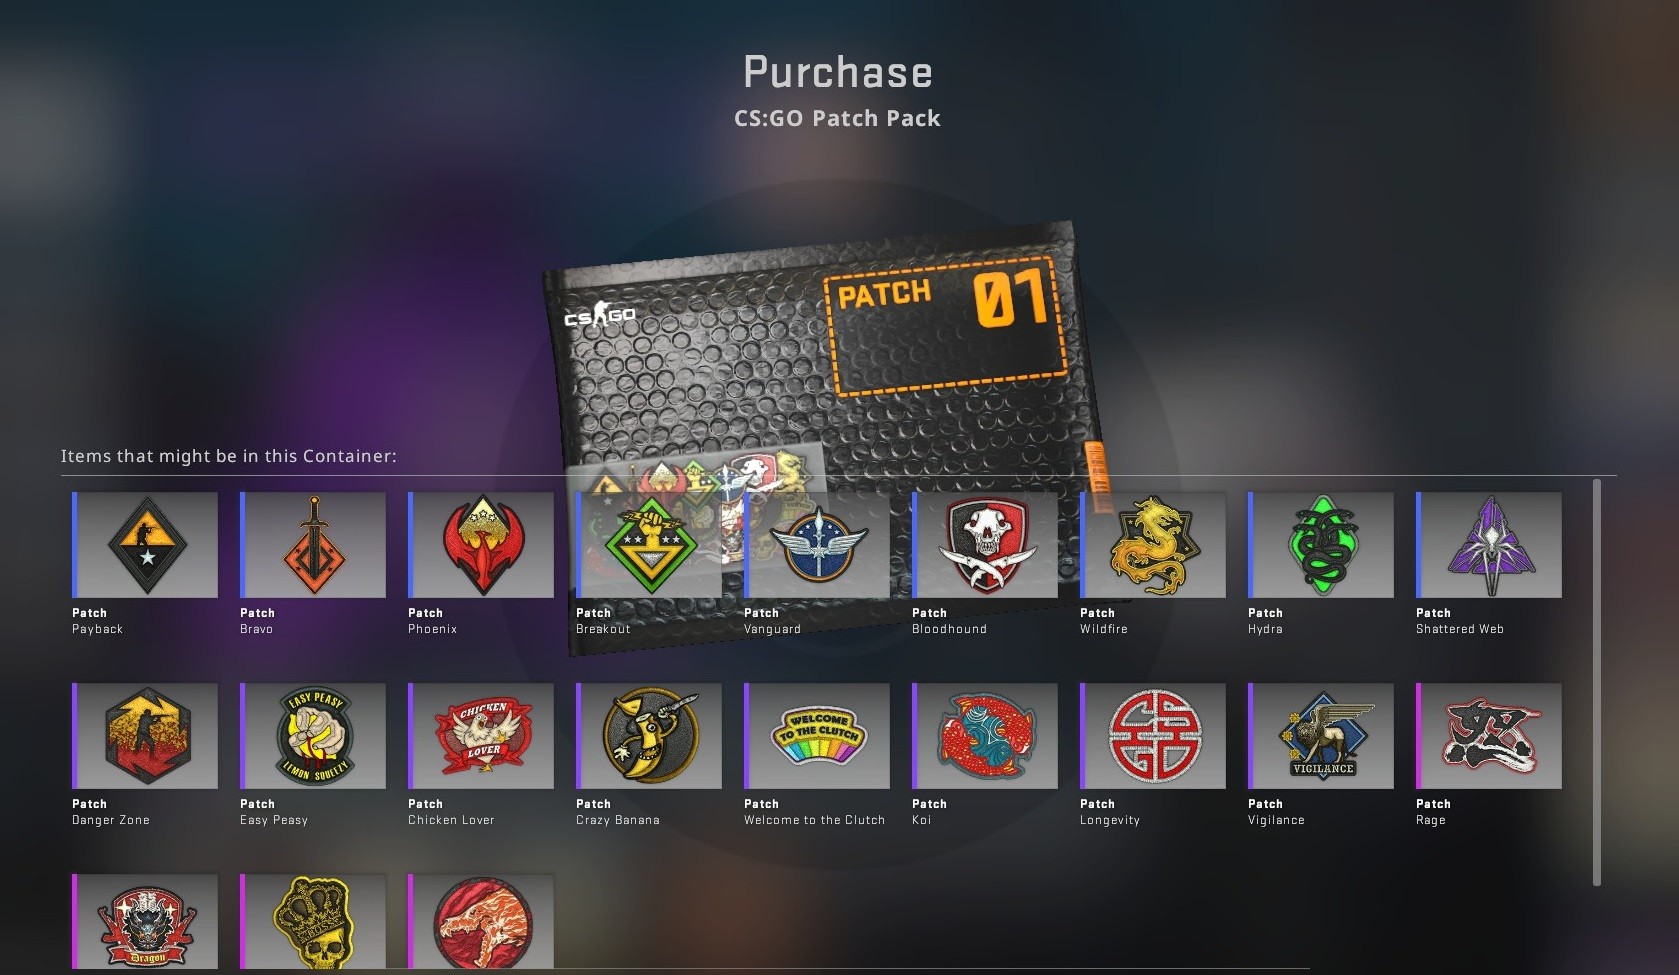 csgo patch pack